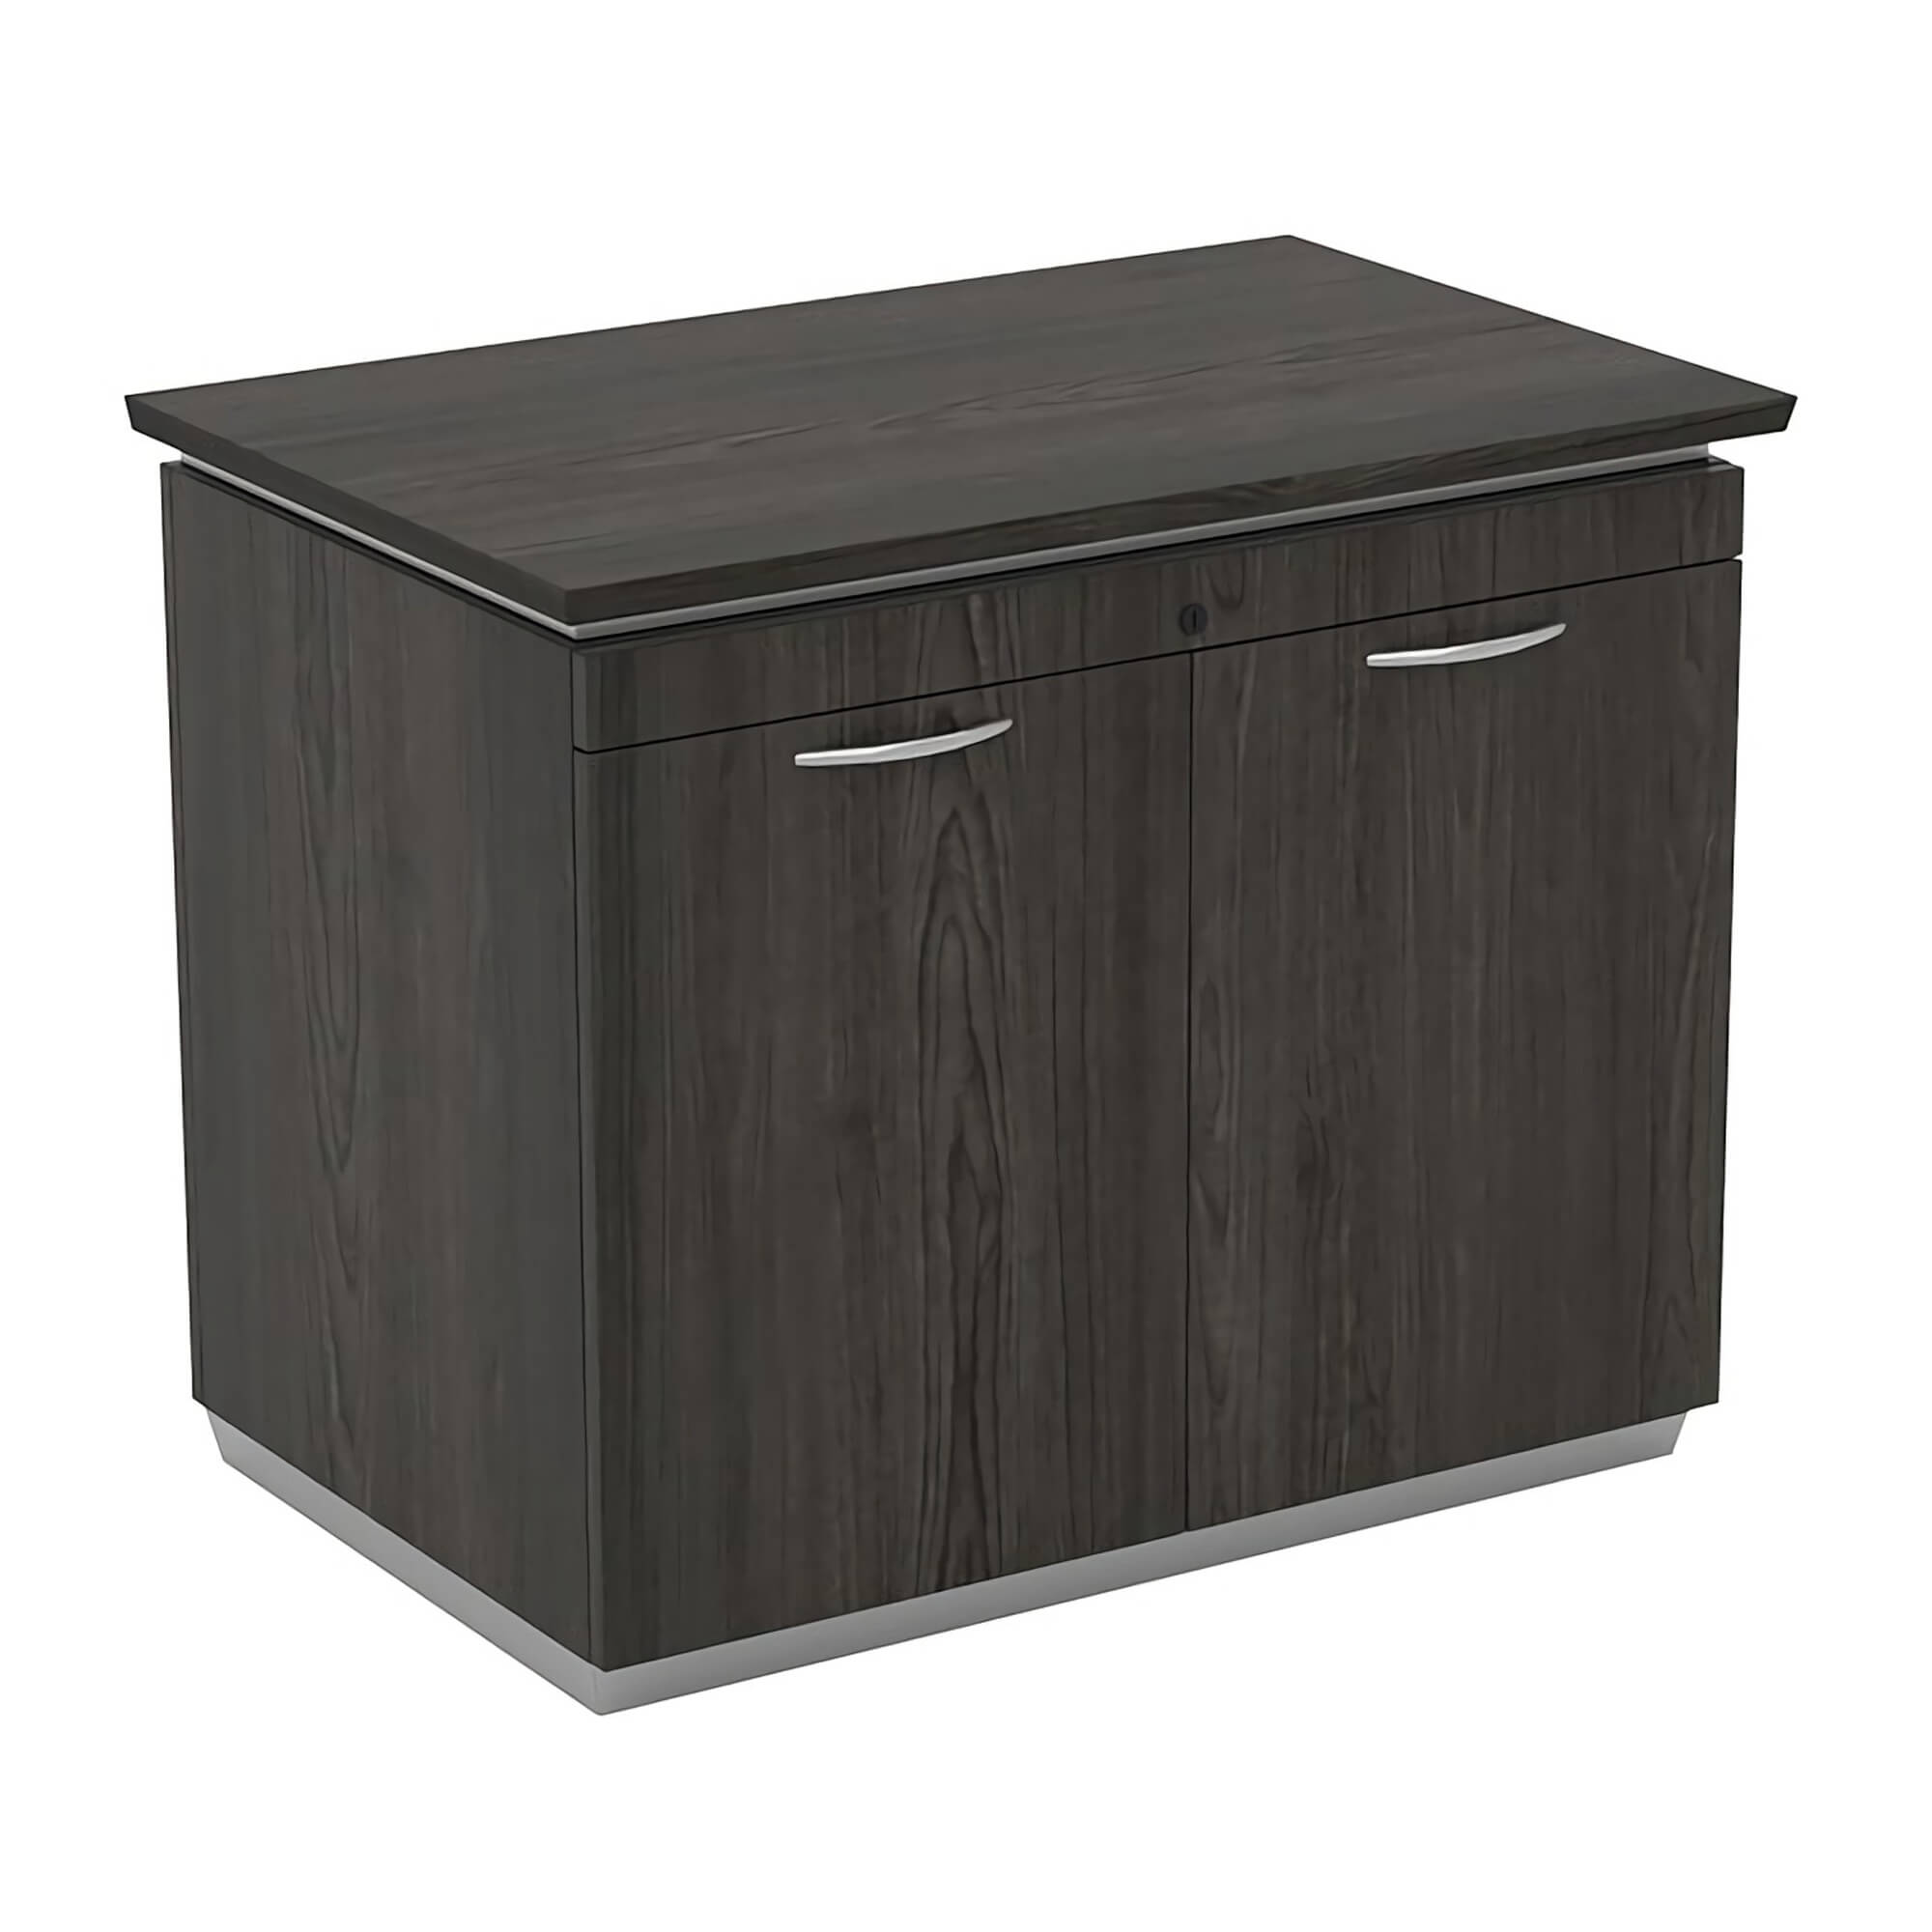 black-tie-conference-room-tables-office-storage-cabinet-36-inch-1.jpg